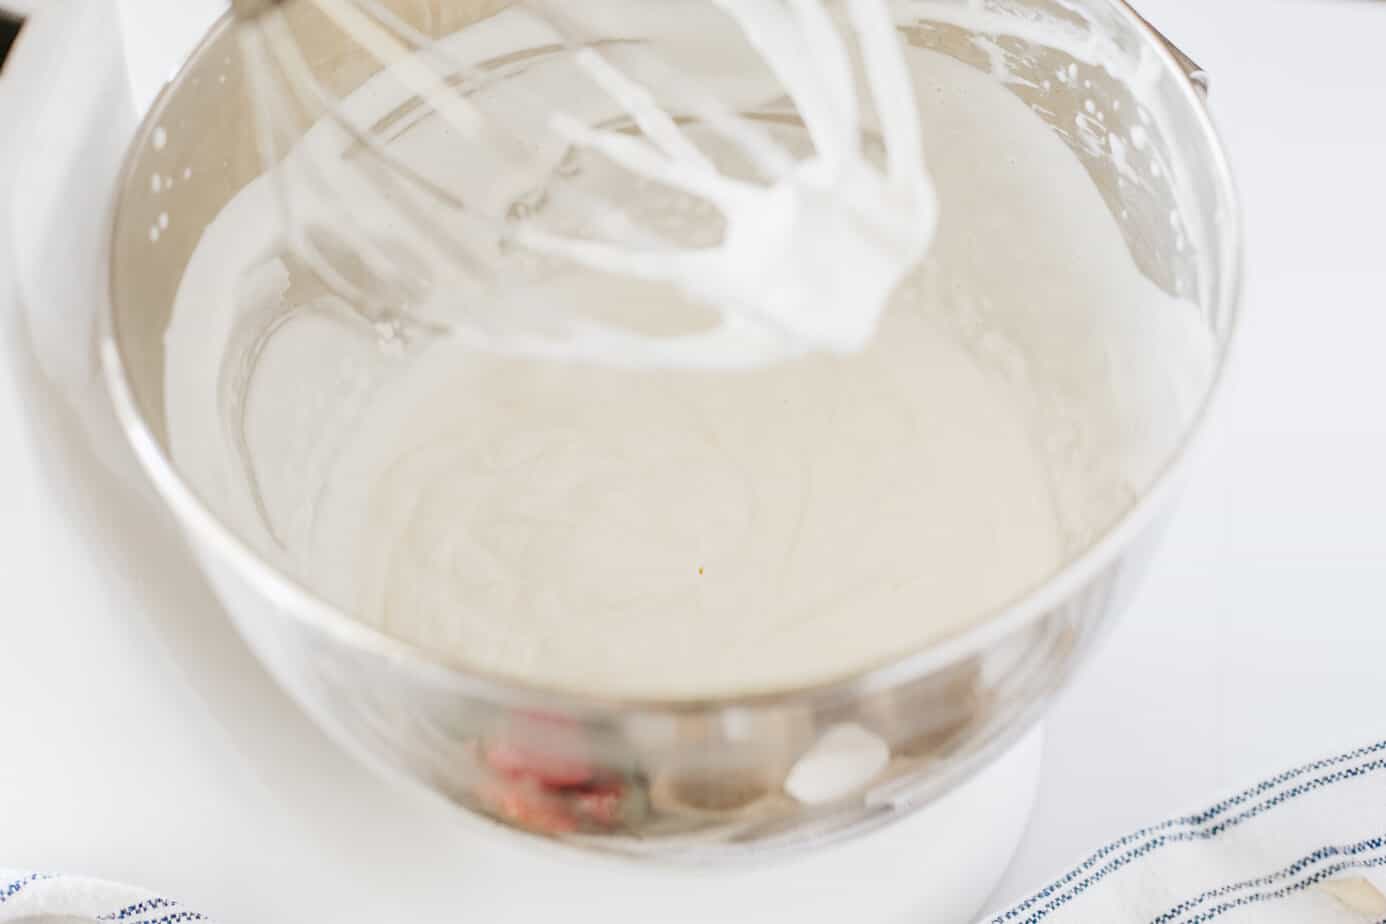 whipped cream in a mixer bowl